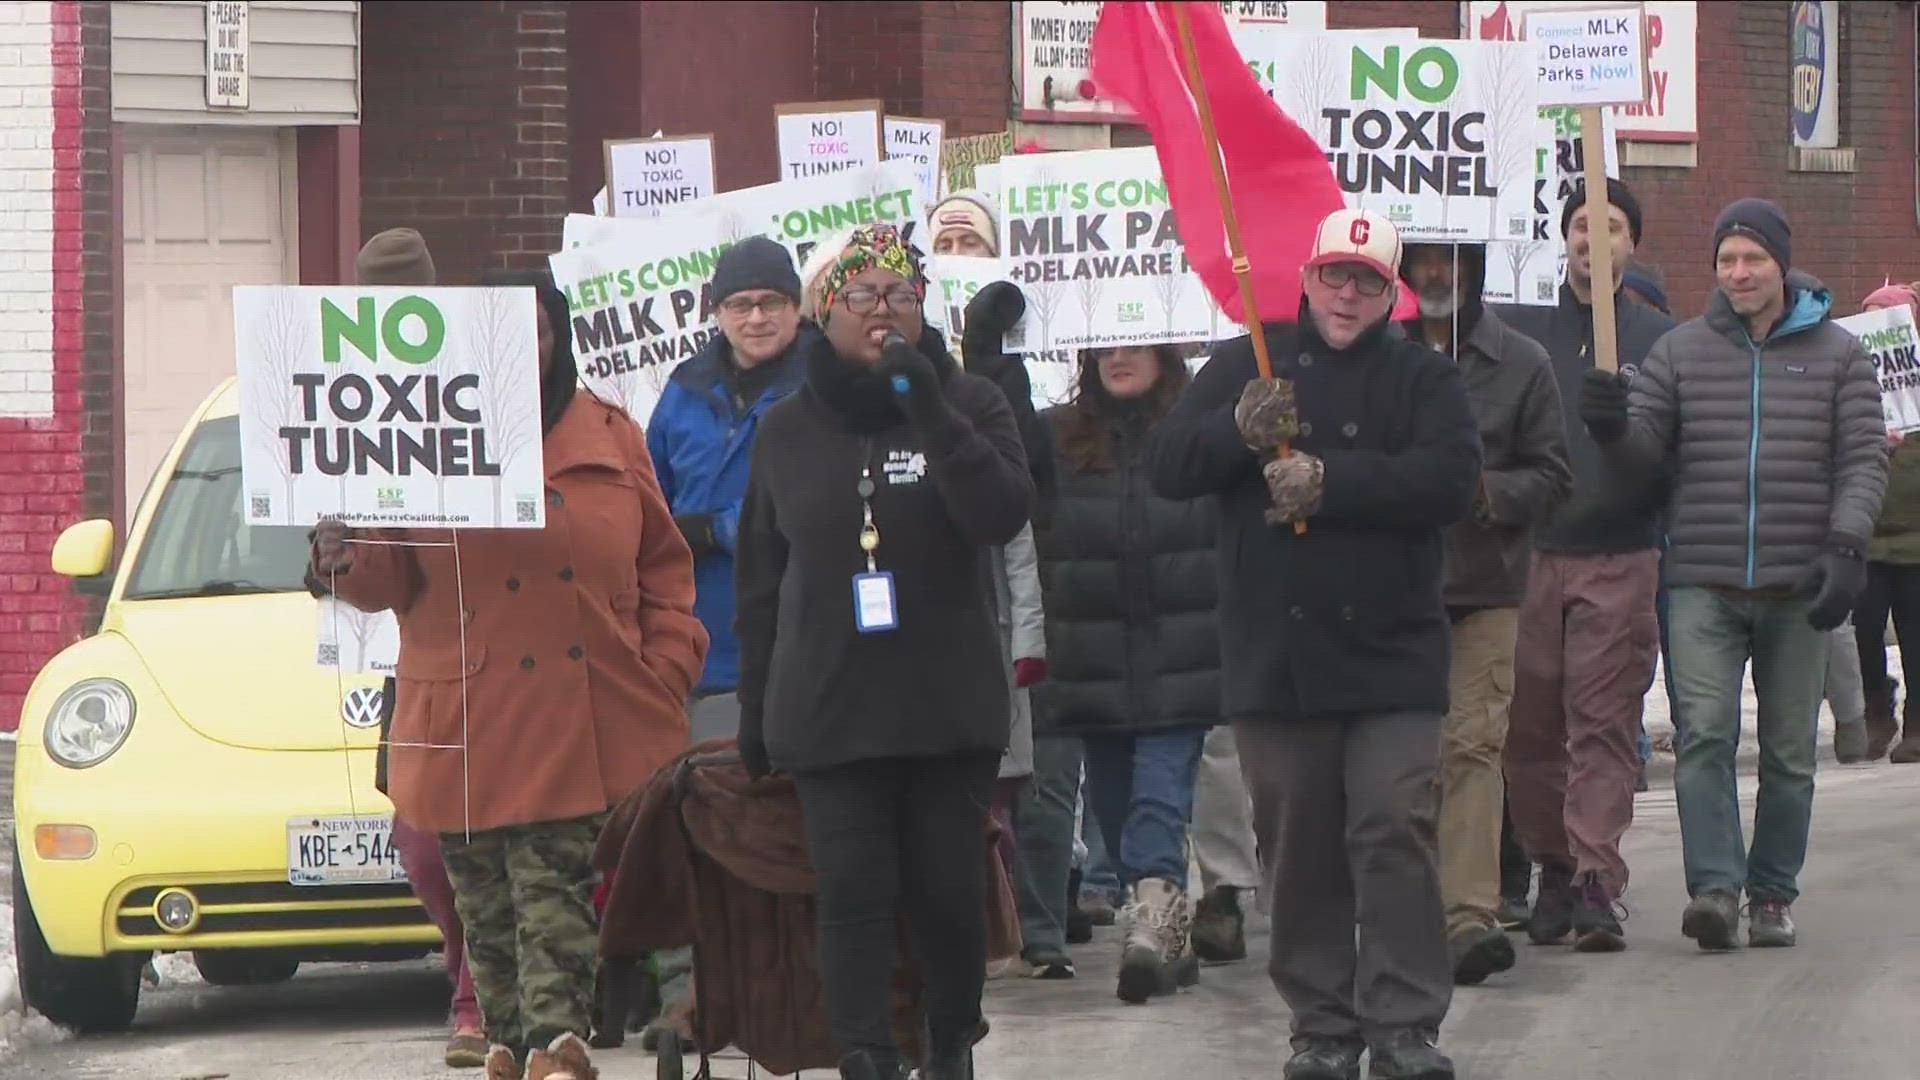 About 3 dozen demonstrators braved the cold, to call for the expressway to be removed entirely rather than having a tunnel constructed.